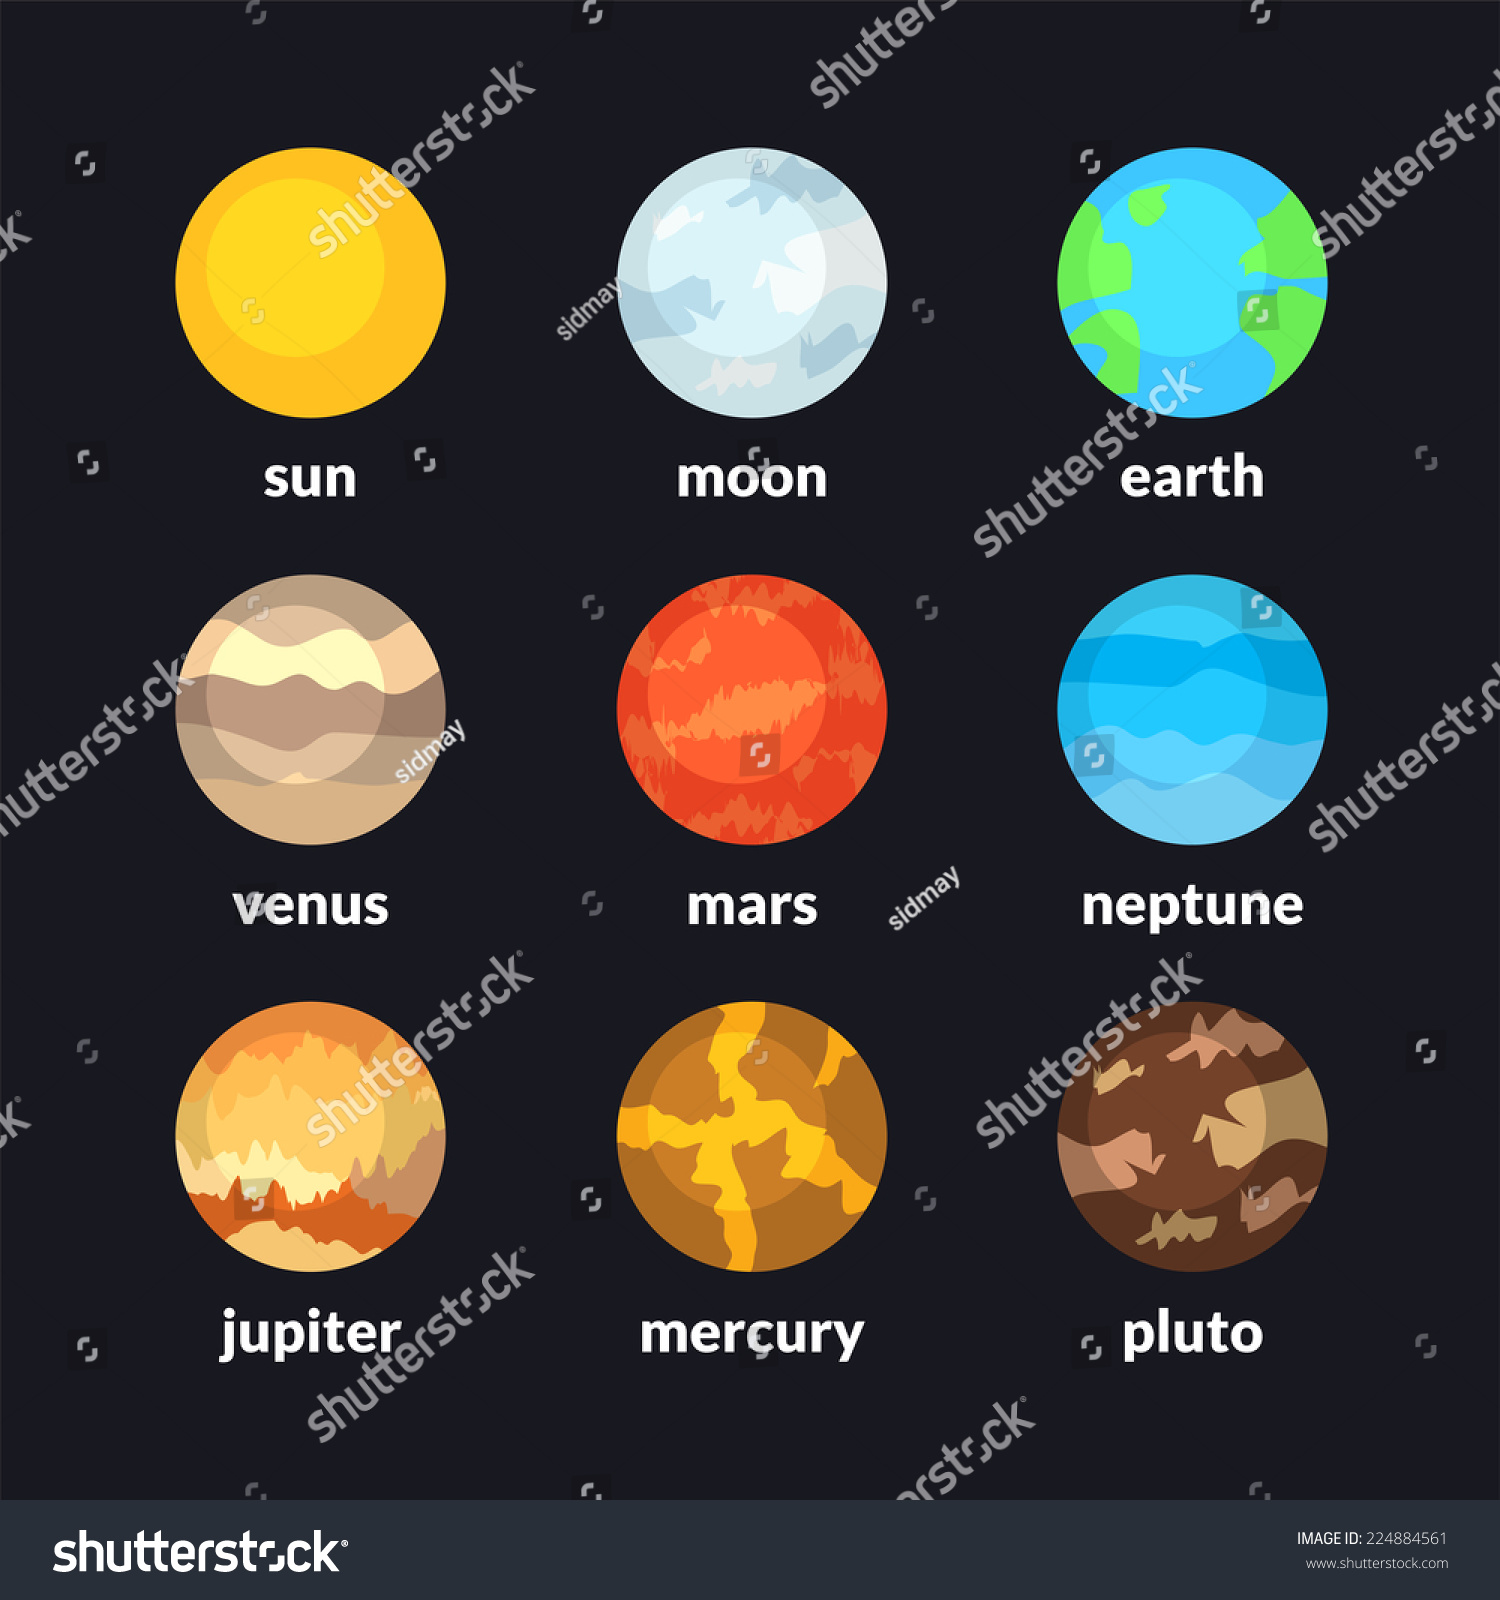 Planets Of Solar System, Vector Icons Set - 224884561 : Shutterstock